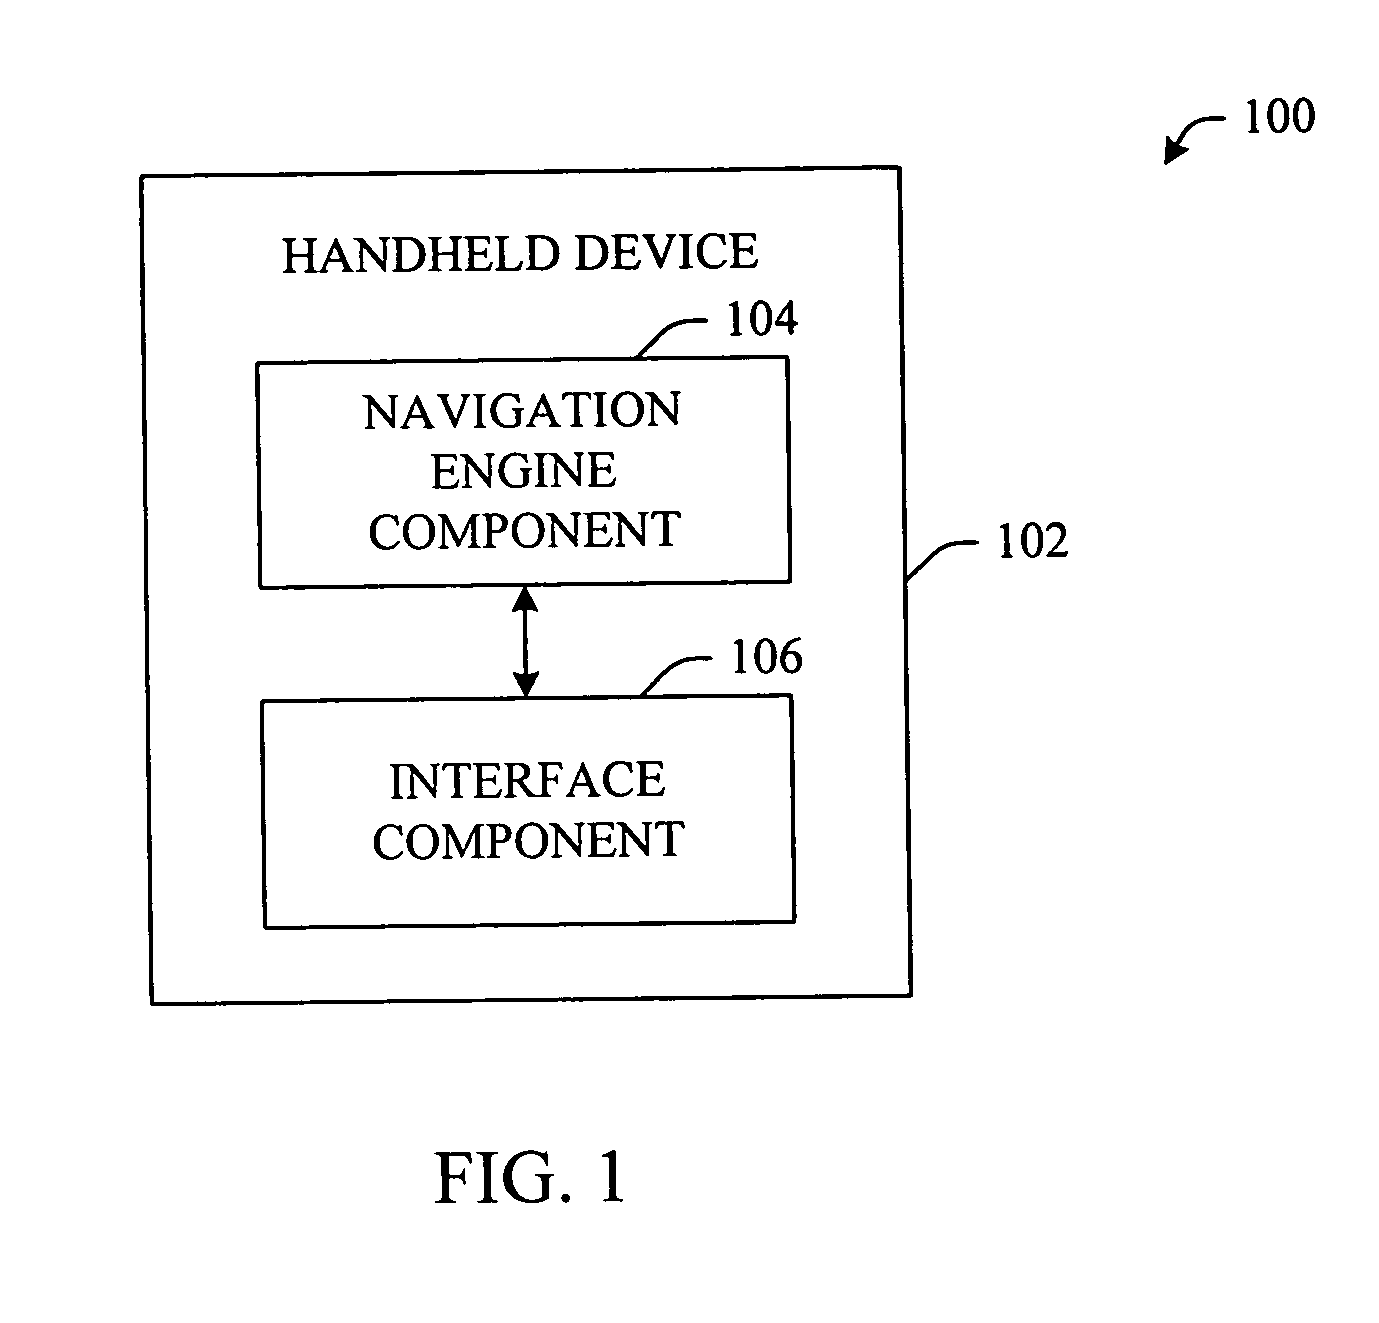 Integration of navigation device functionality into handheld devices